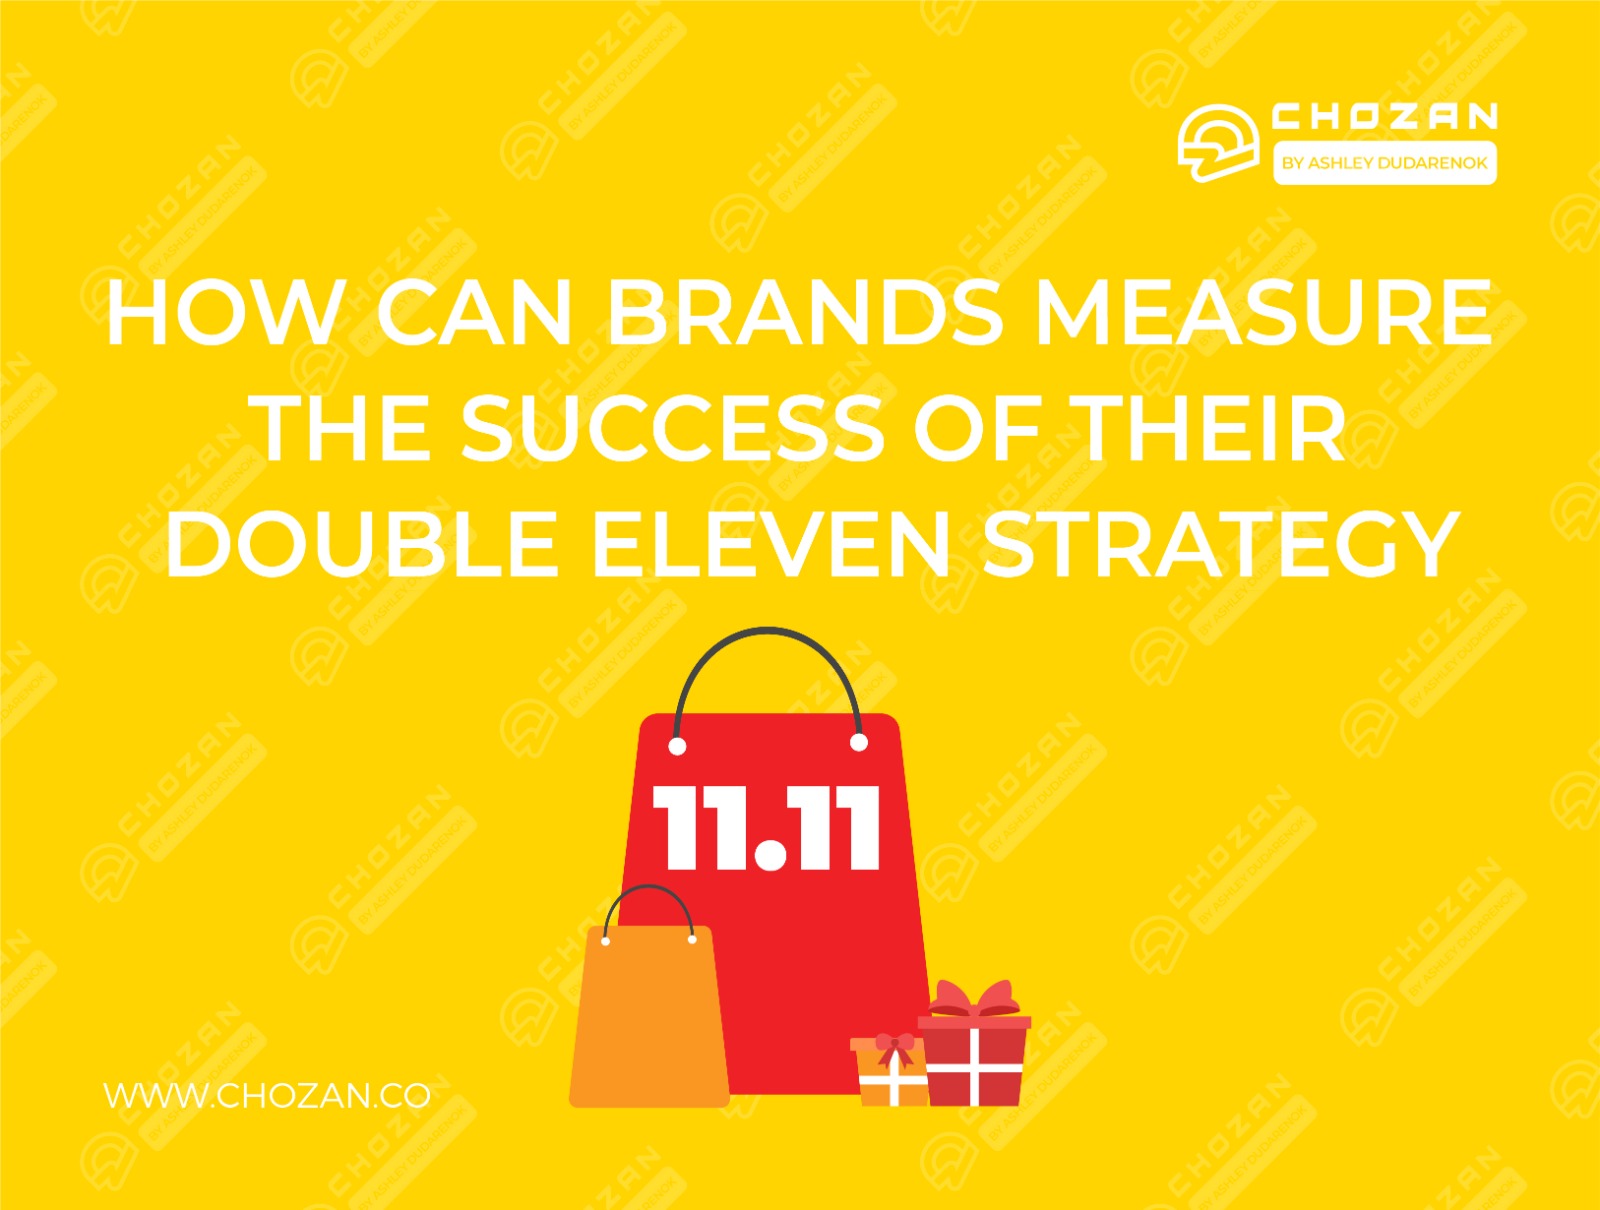 How Can Brands Measure the Success of Their Double Eleven Strategy